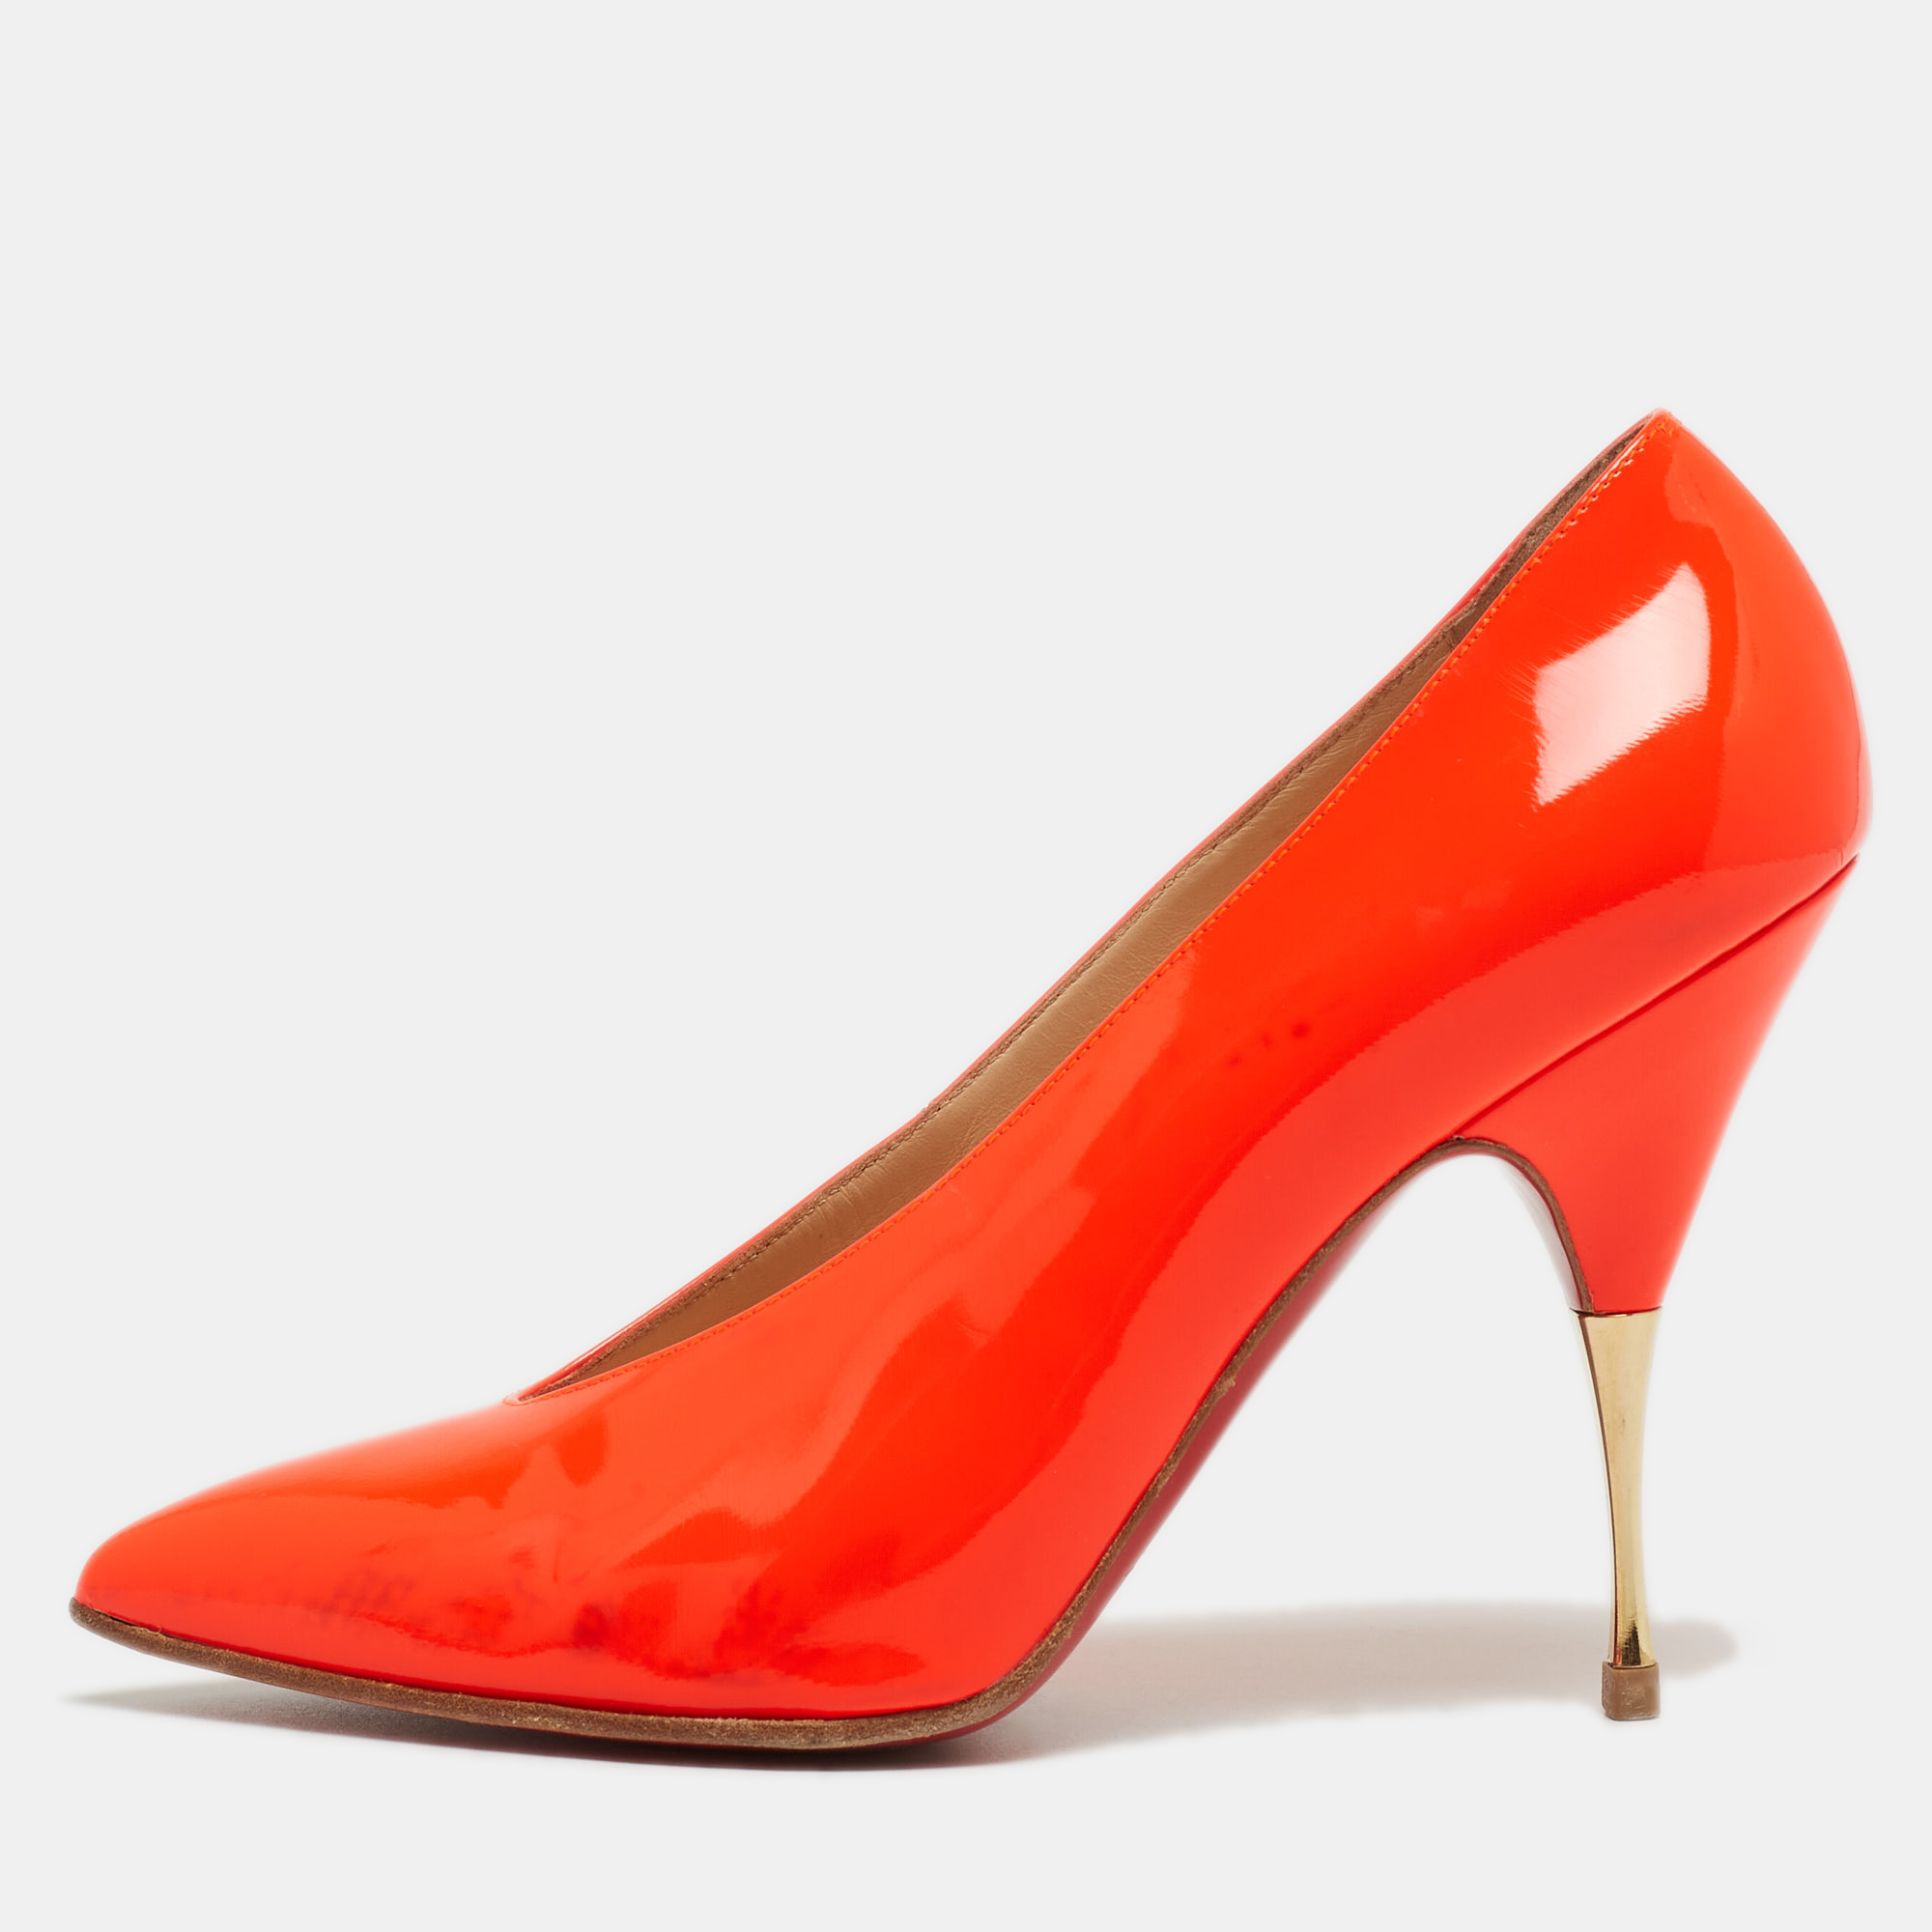 Pre-owned Christian Louboutin Neon Orange Patent Leather Lola Pumps Size 38